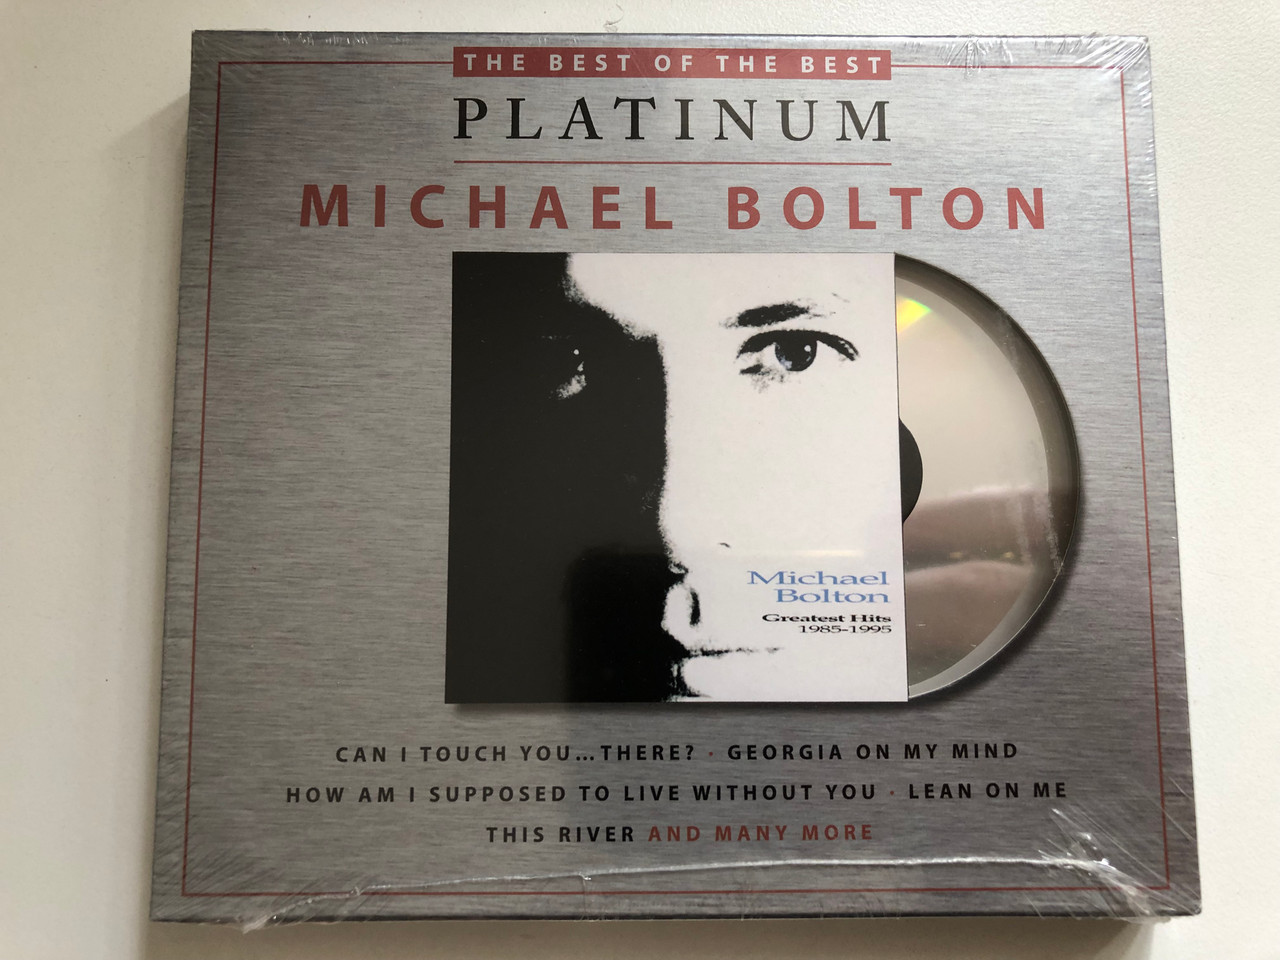 https://cdn10.bigcommerce.com/s-62bdpkt7pb/products/0/images/294770/Michael_Bolton_Greatest_Hits_1985_-_1995_-_The_Best_Of_The_Best_Platinum_Can_I_Touch_You..._There_Georgia_On_My_Mind_How_Am_I_Supposed_To_Live_Without_You_Lean_On_Me_This_River_And_Many_1__35363.1692612658.1280.1280.JPG?c=2&_gl=1*gcmchd*_ga*MjA2NTIxMjE2MC4xNTkwNTEyNTMy*_ga_WS2VZYPC6G*MTY5MjYwMjgwOS4xMDM4LjEuMTY5MjYxMjYxMC42MC4wLjA.